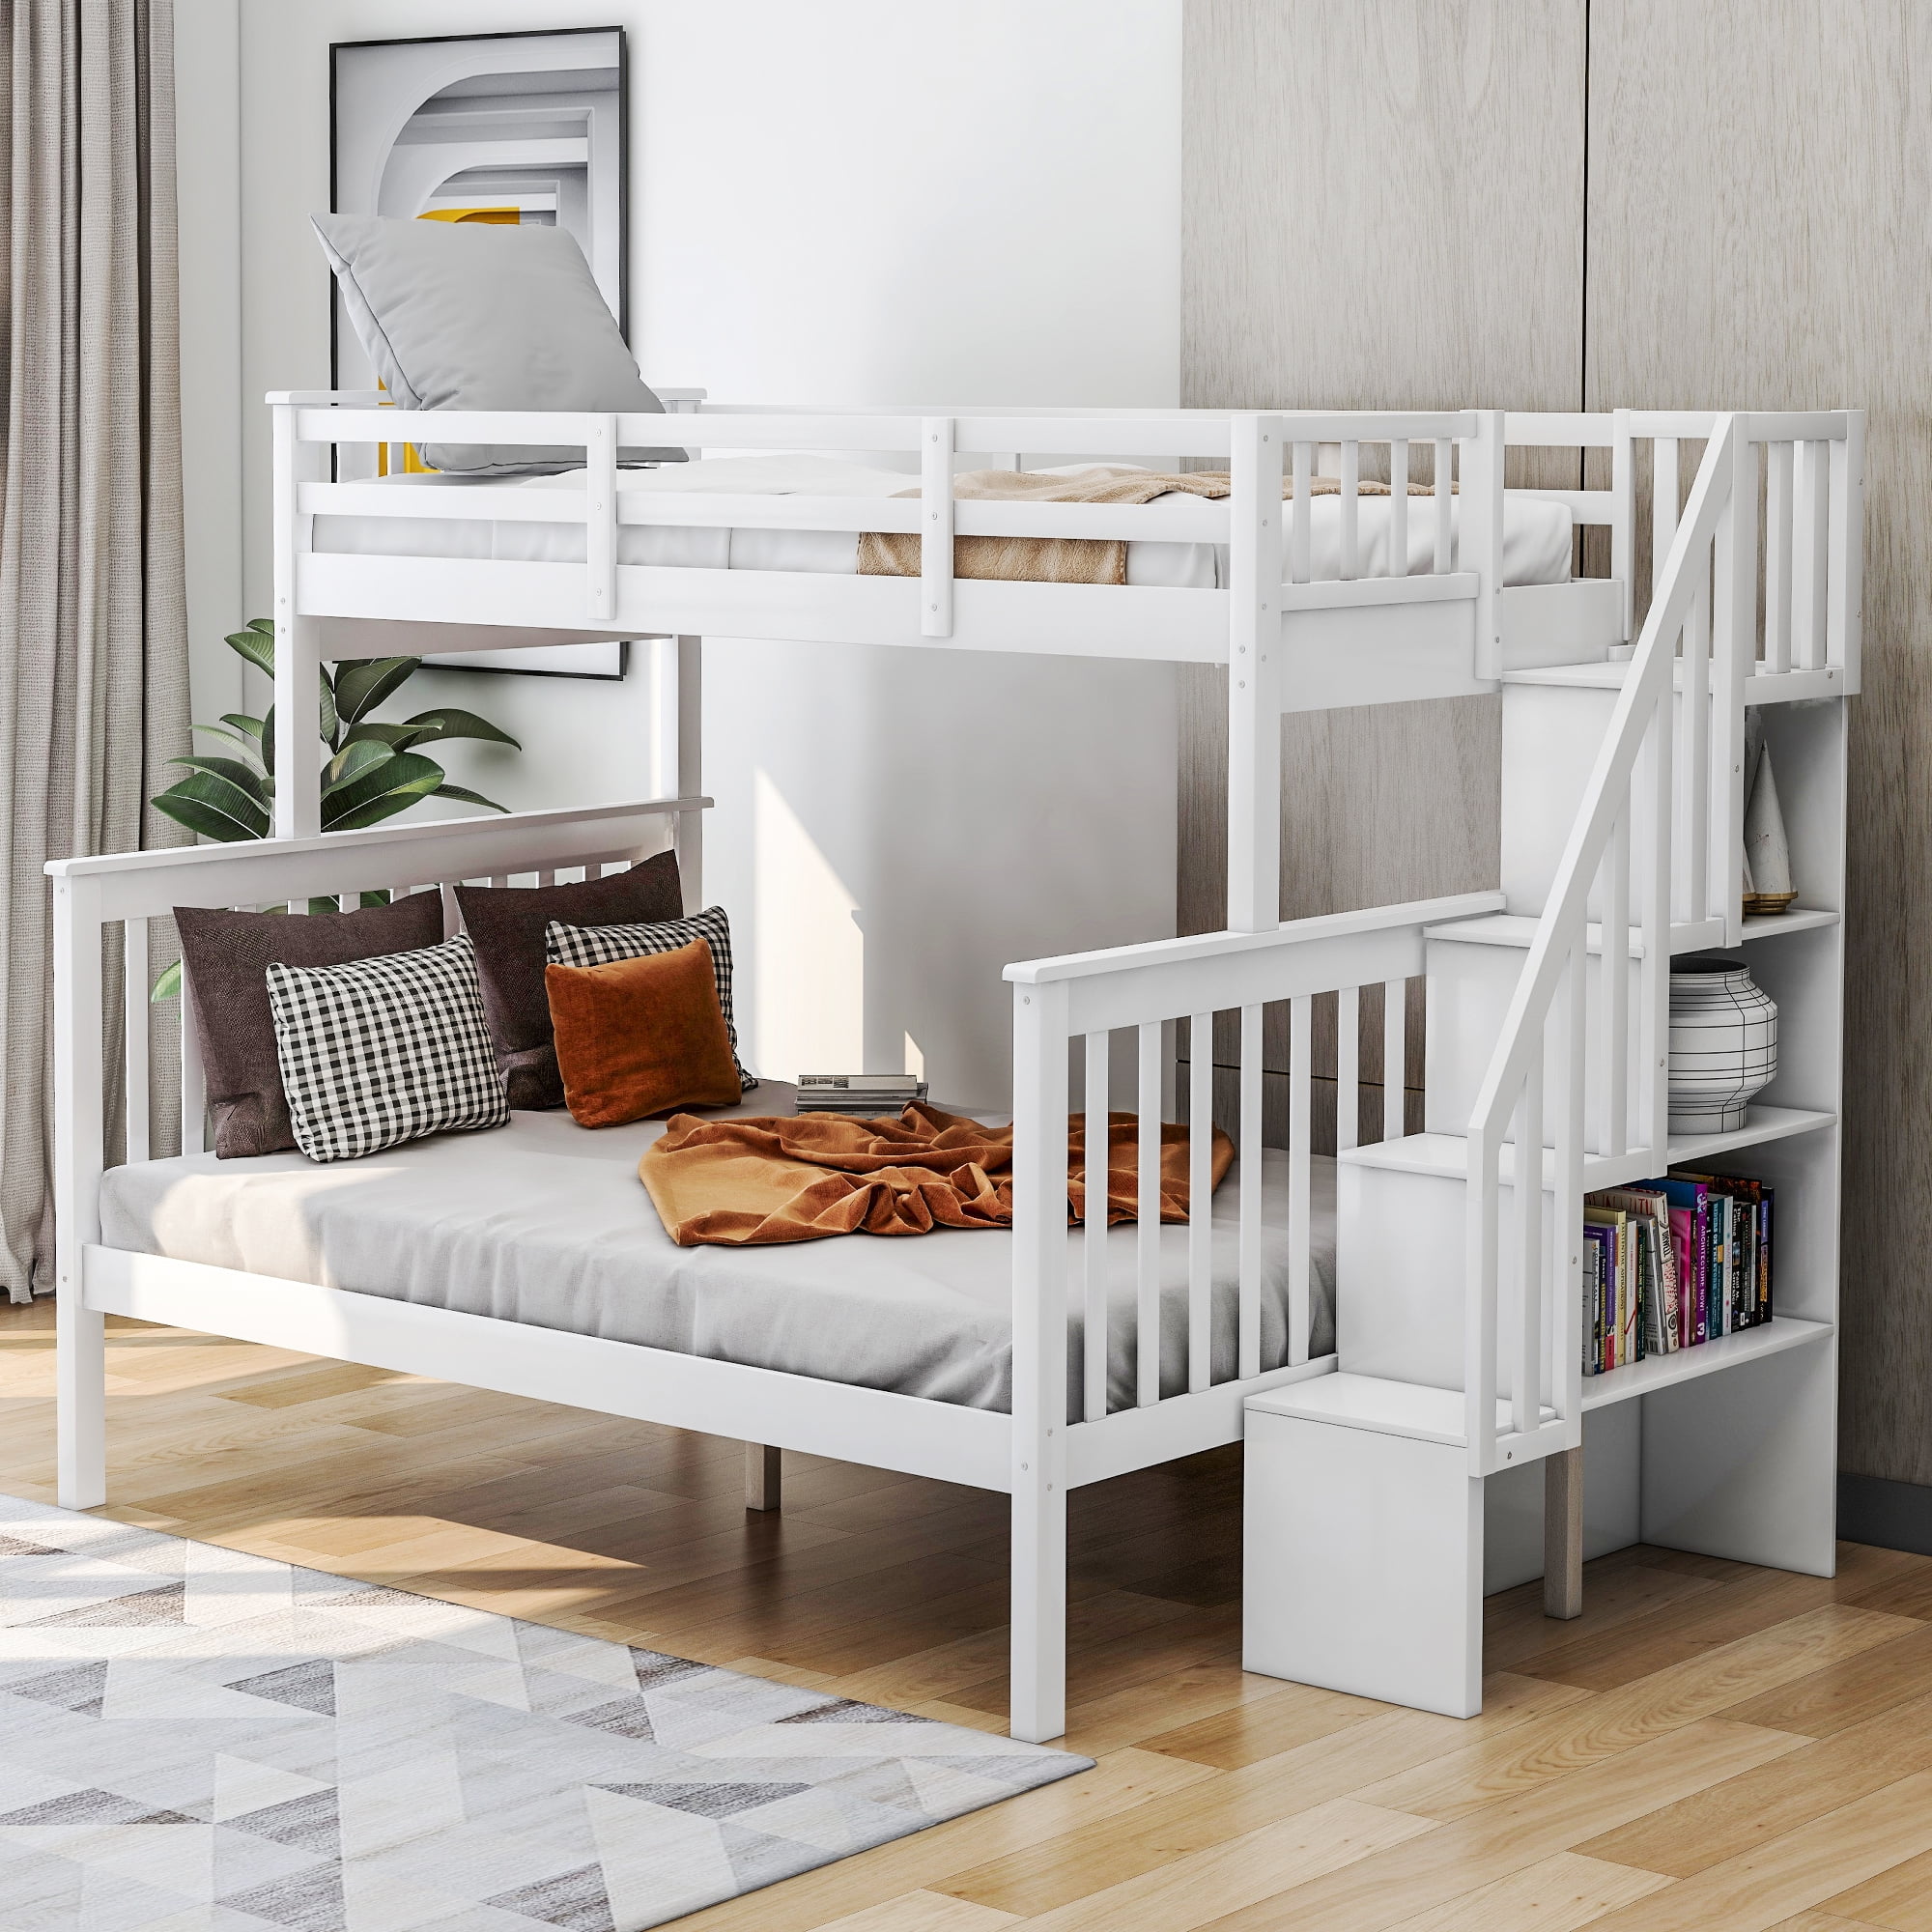 Bunk Beds Twin Over Twin Kids Furniture Wood Convertible Kid Bed 4-Step Ladder